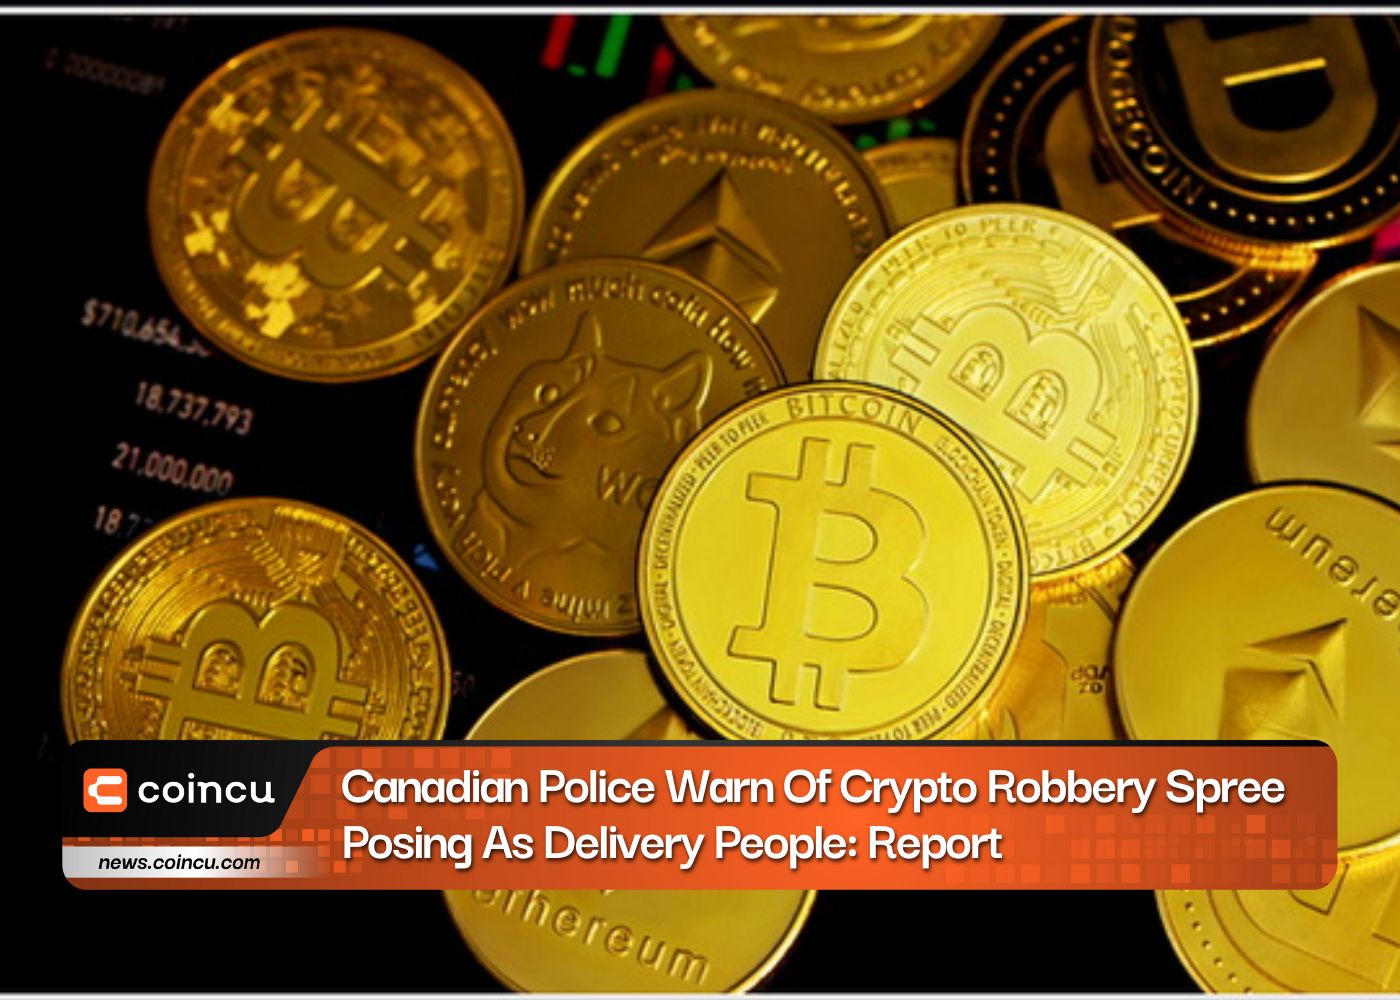 Canadian Police Warn Of Crypto Robbery Spree Posing As Delivery People: Report